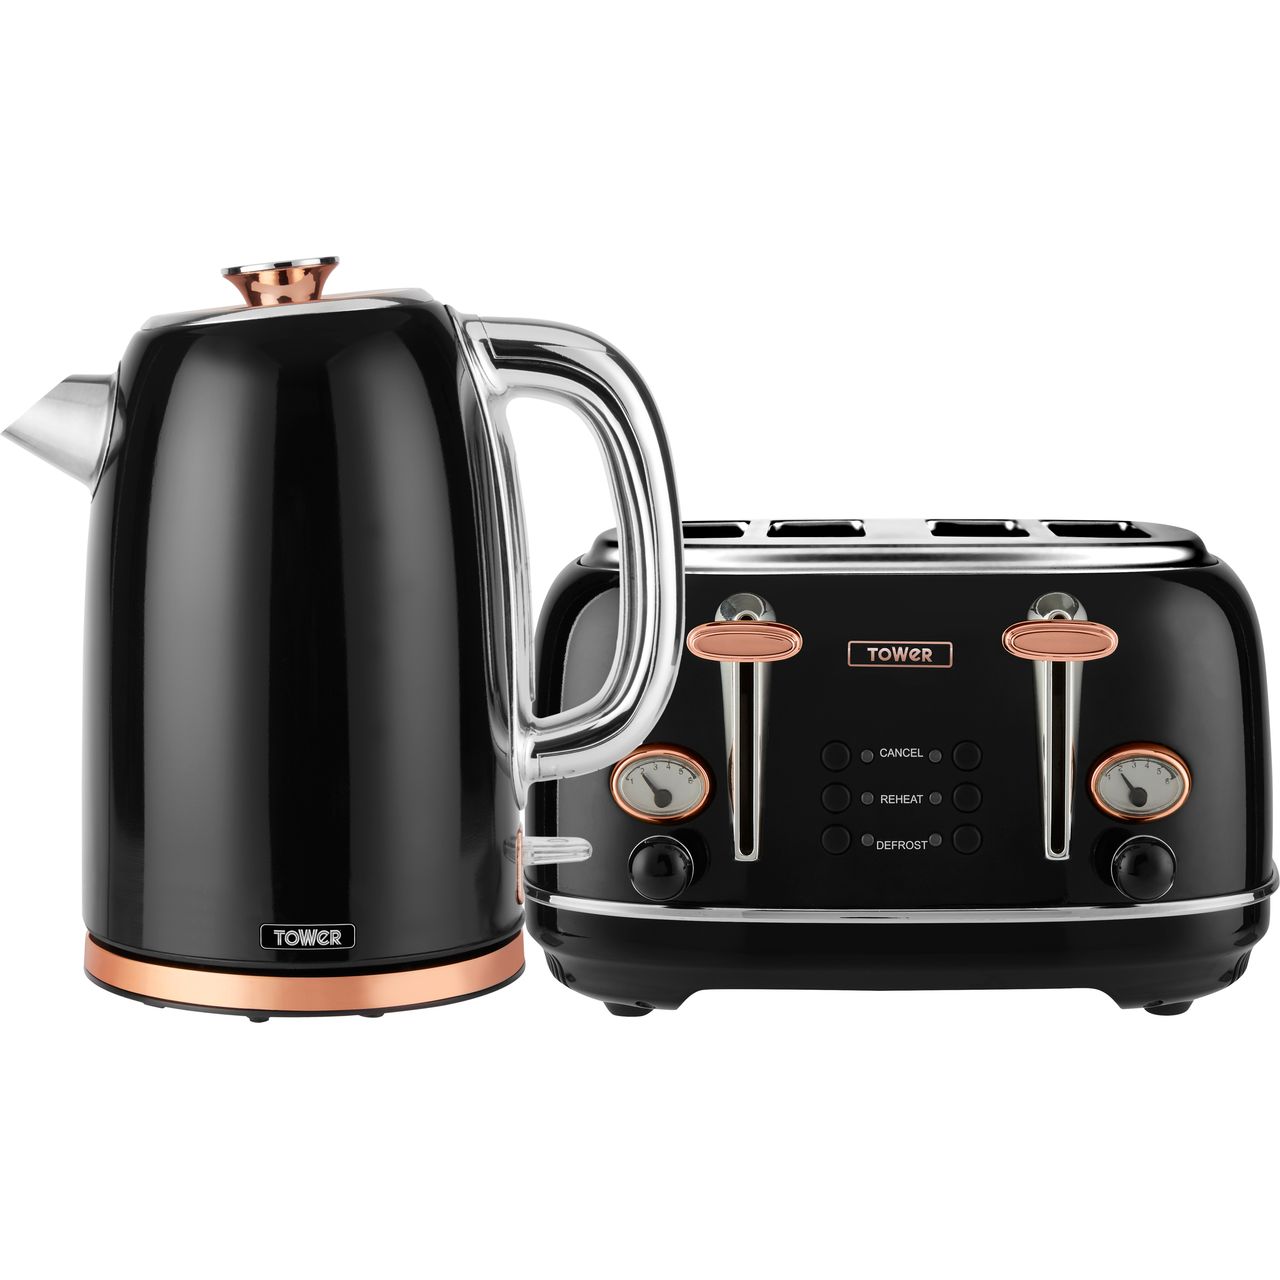 Tower AOBUNDLE004 Kettle And Toaster Sets Review